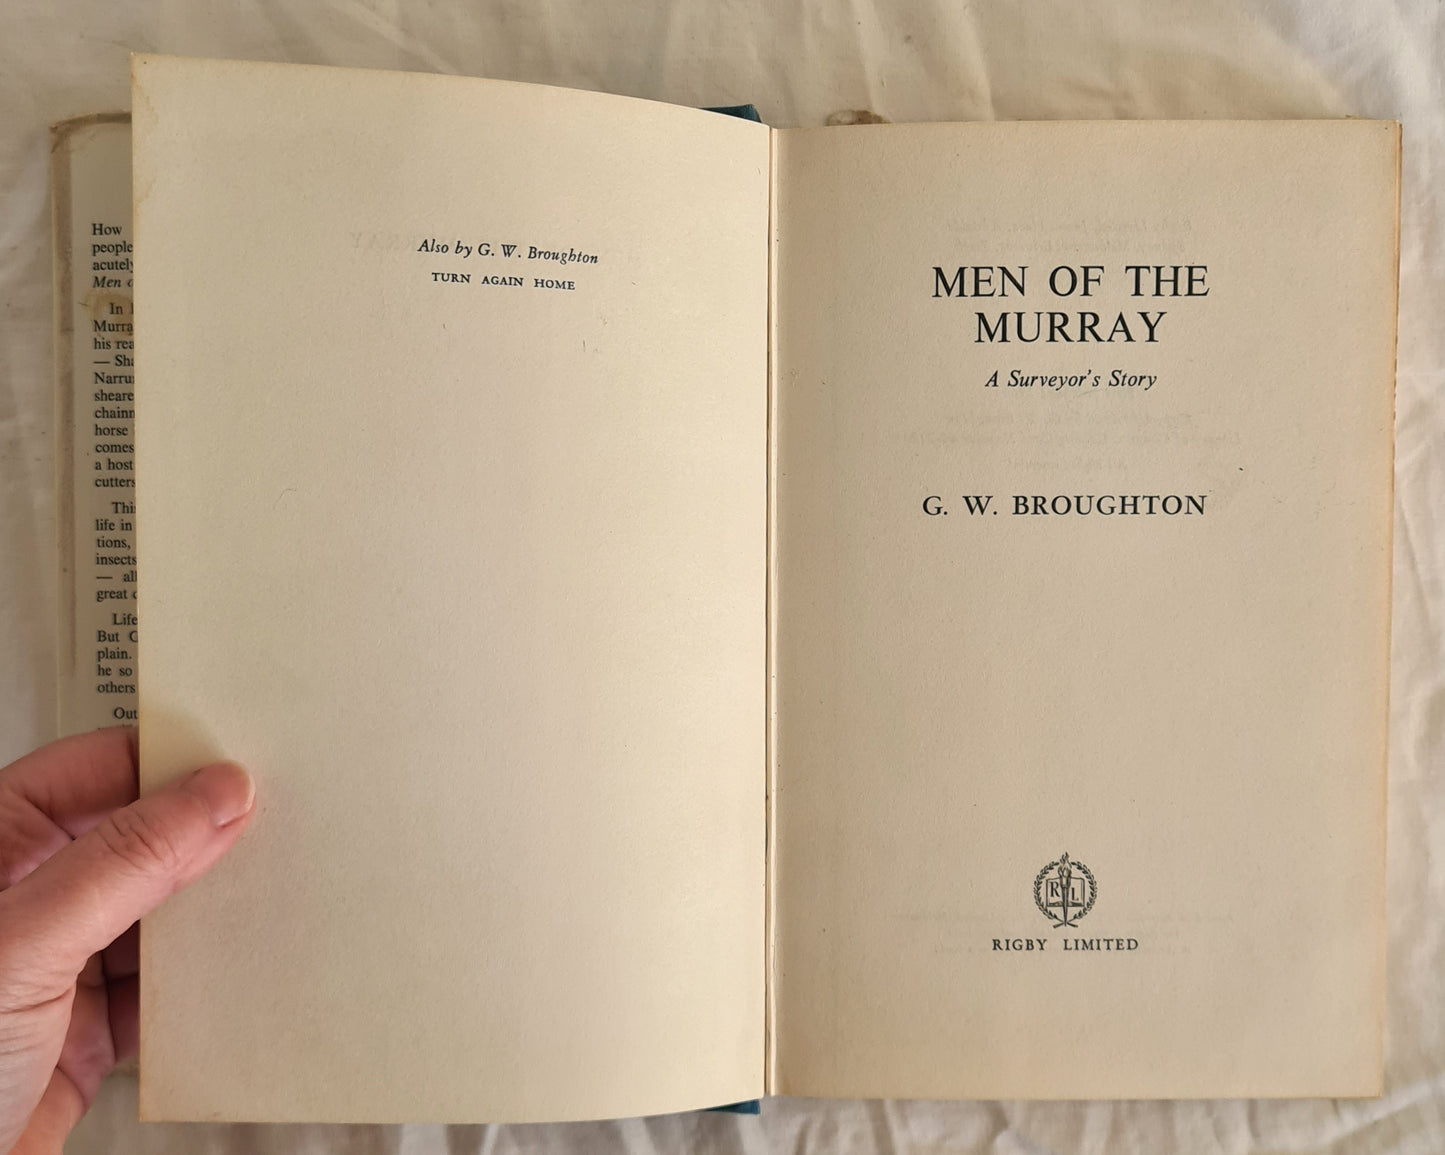 Men of the Murray by G. W. Broughton - 1st Edition